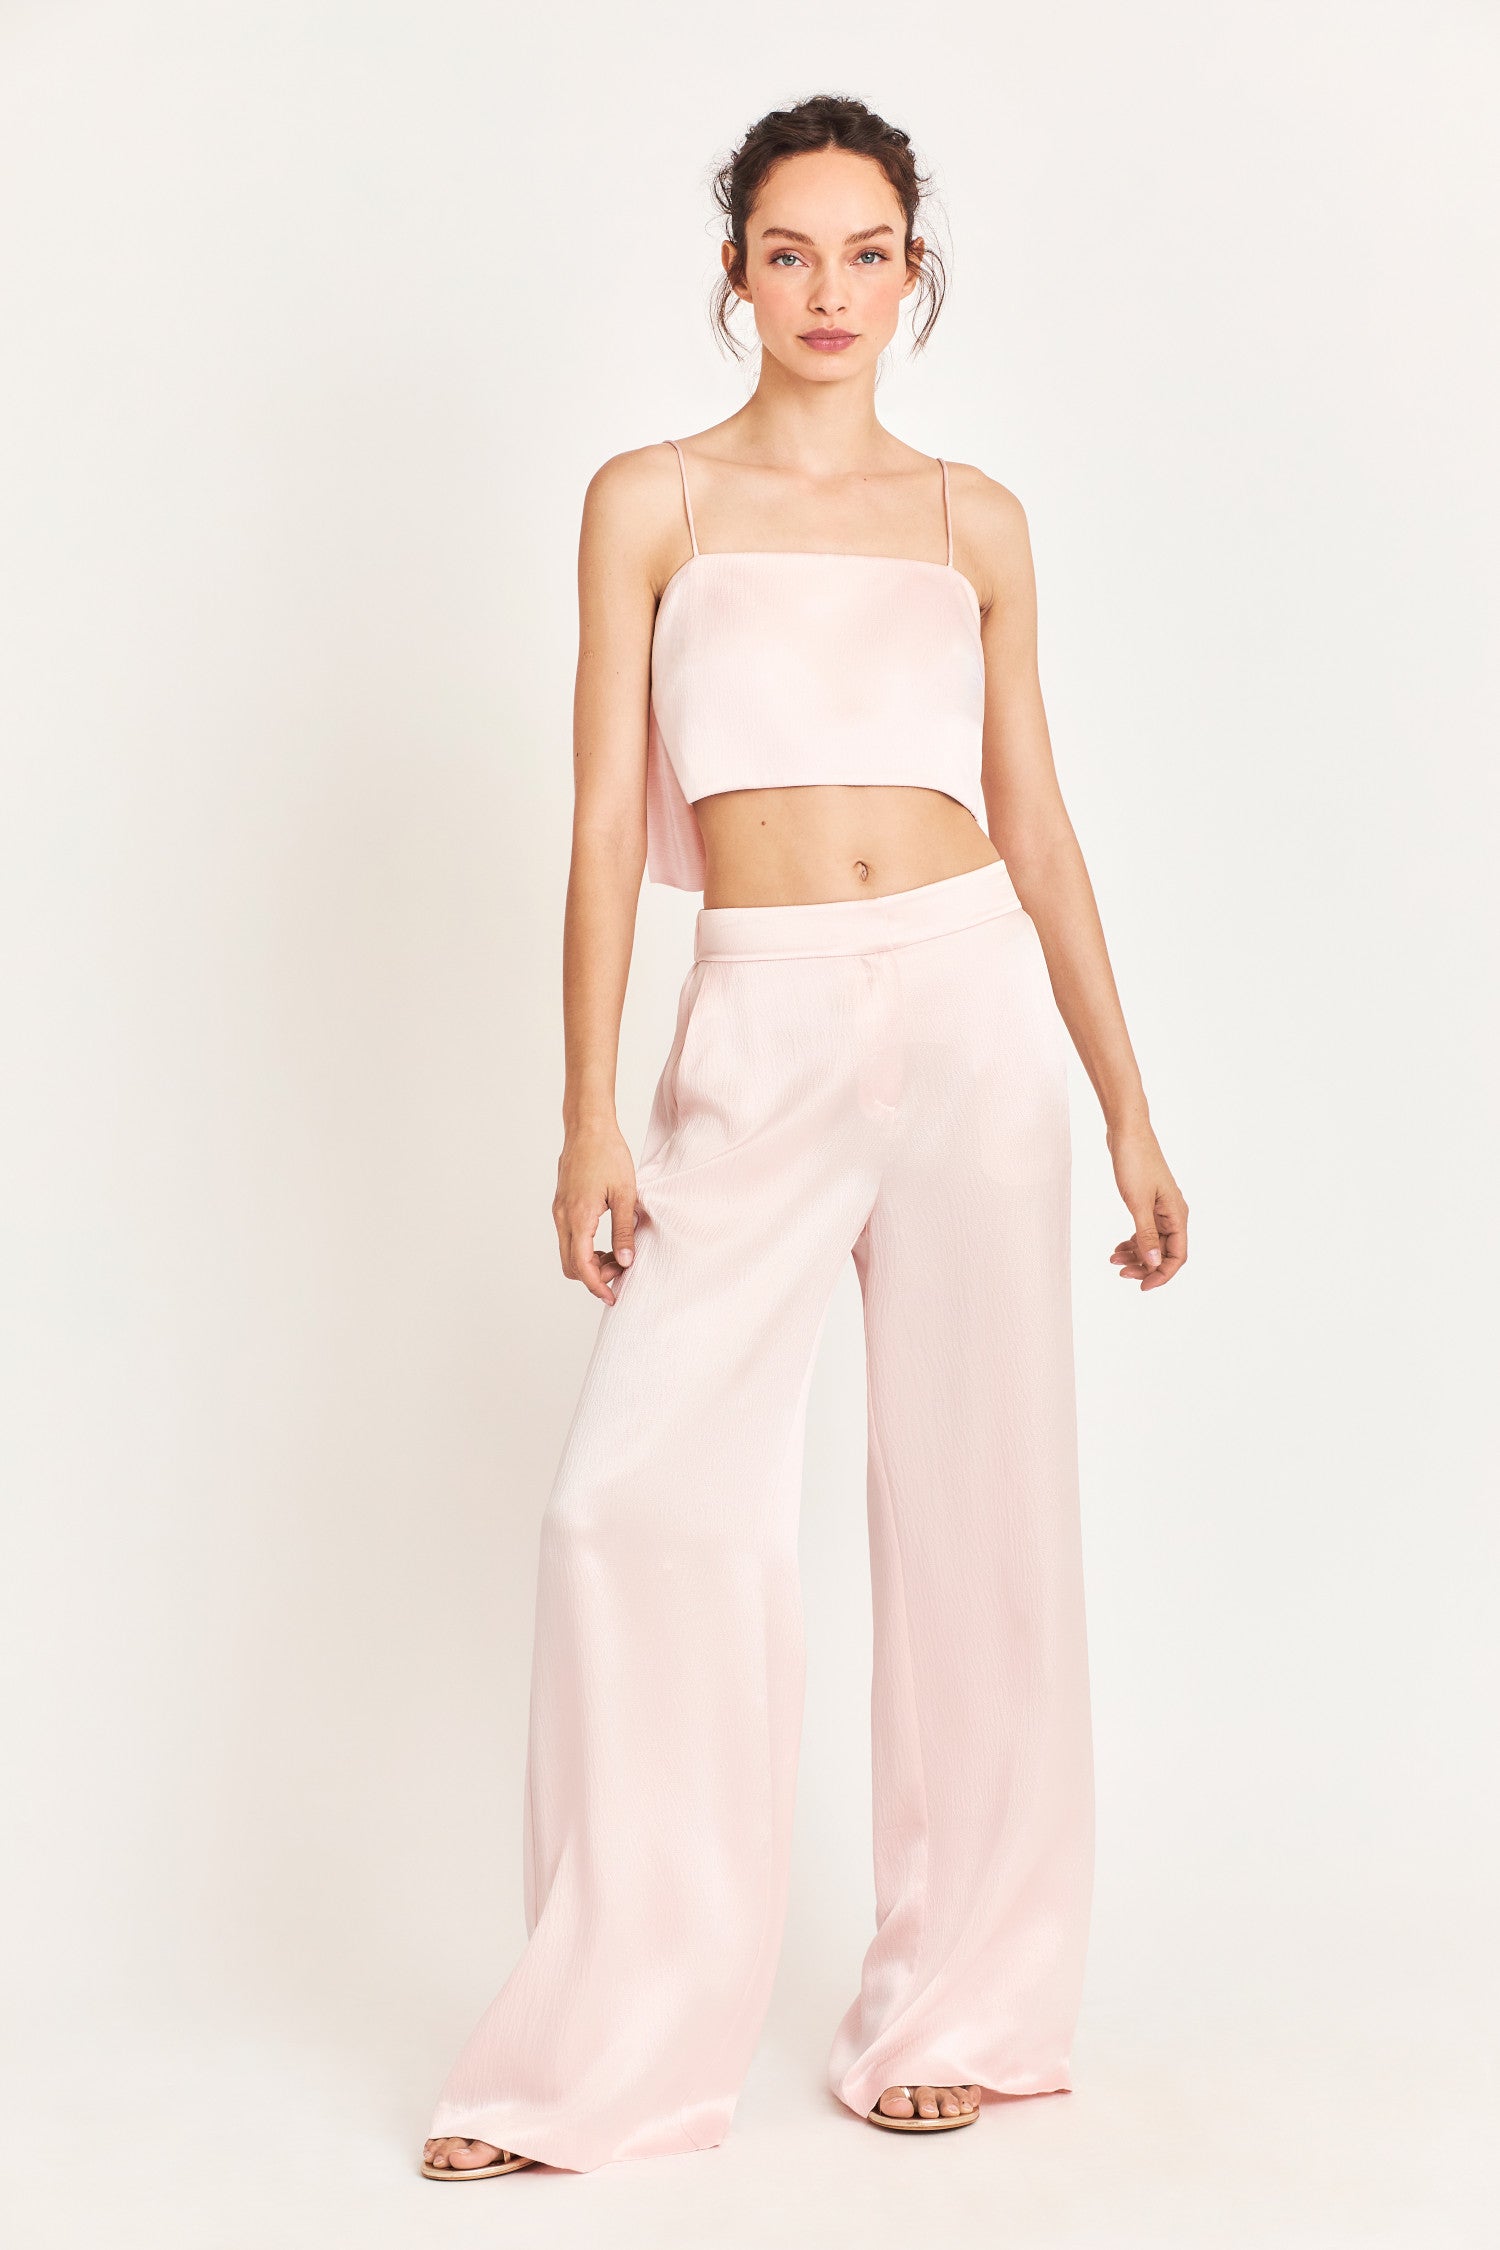 Mid waisted baby pink pants with a wide cut leg that flares out to the bottom